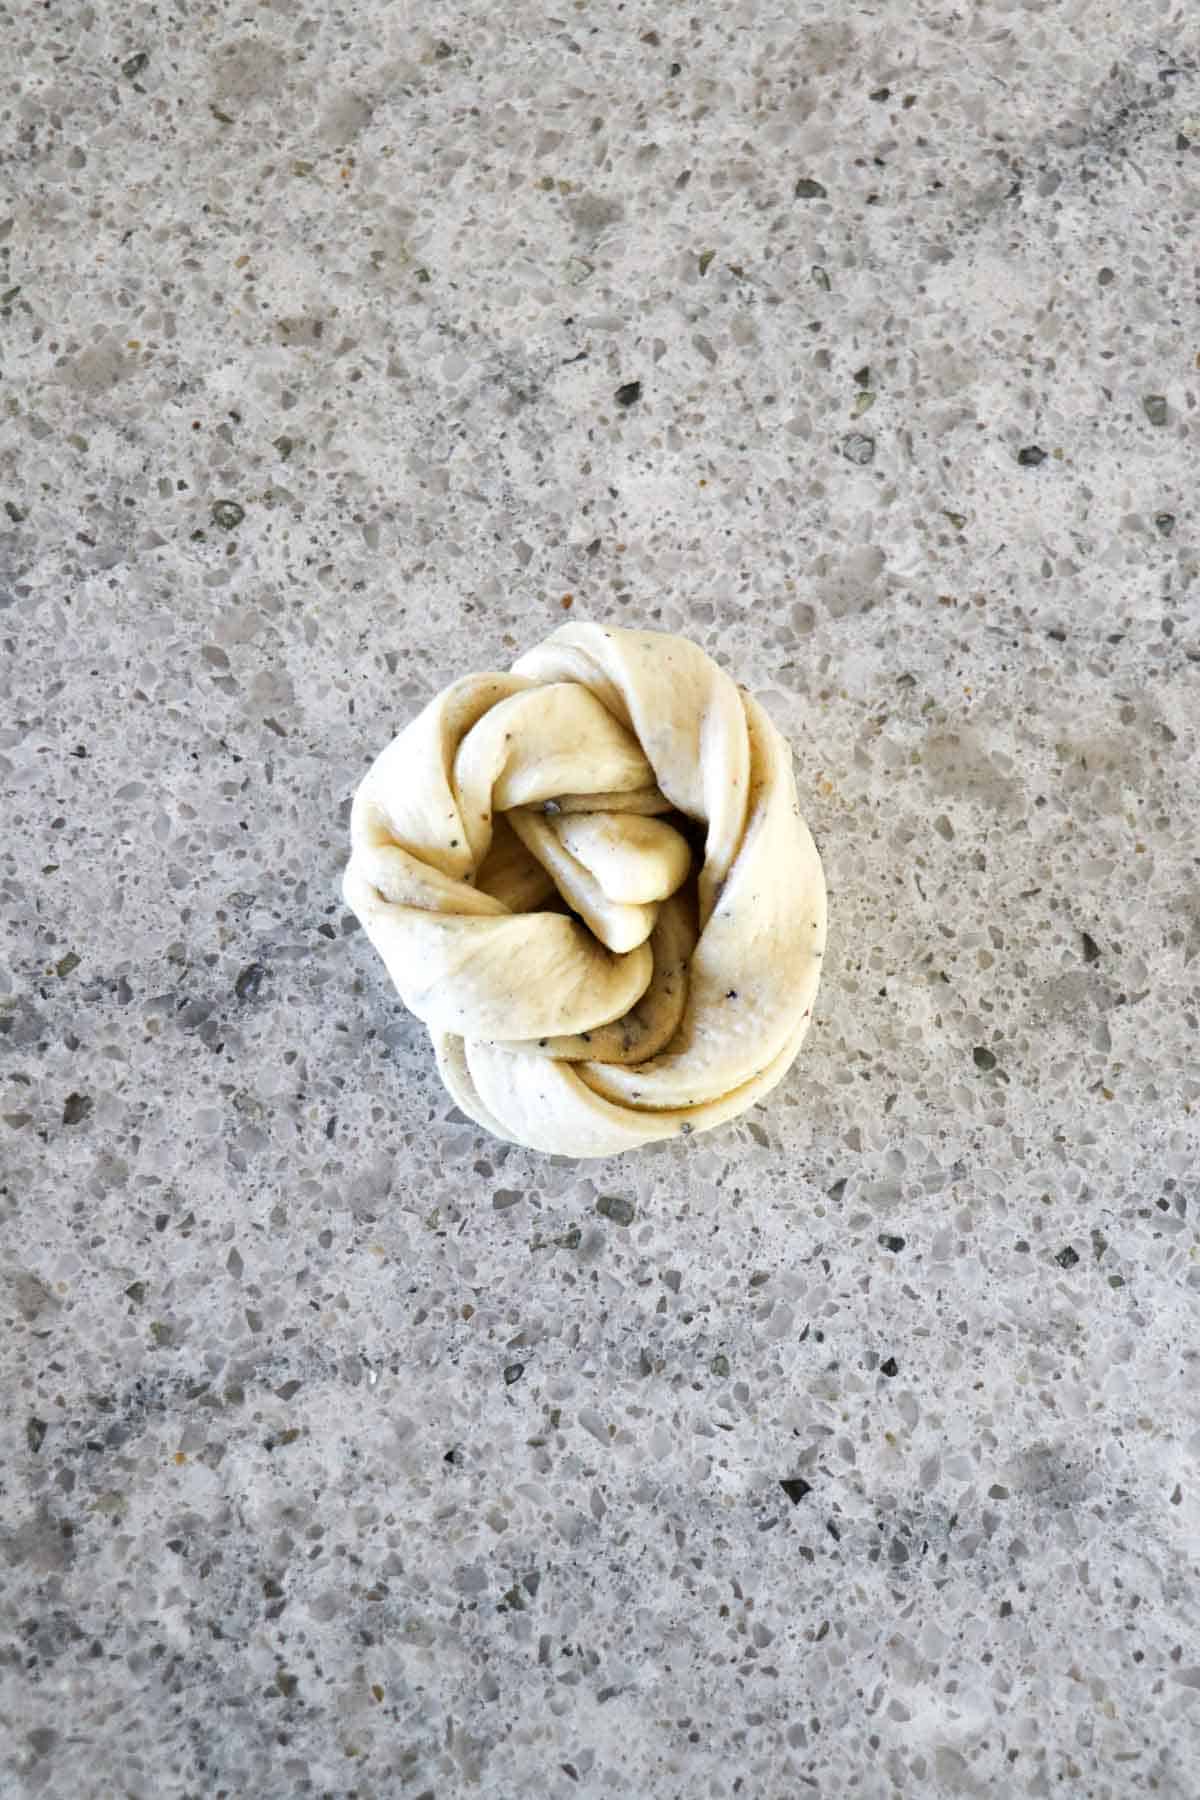 Unbaked cardamom bun on a kitchen counter.